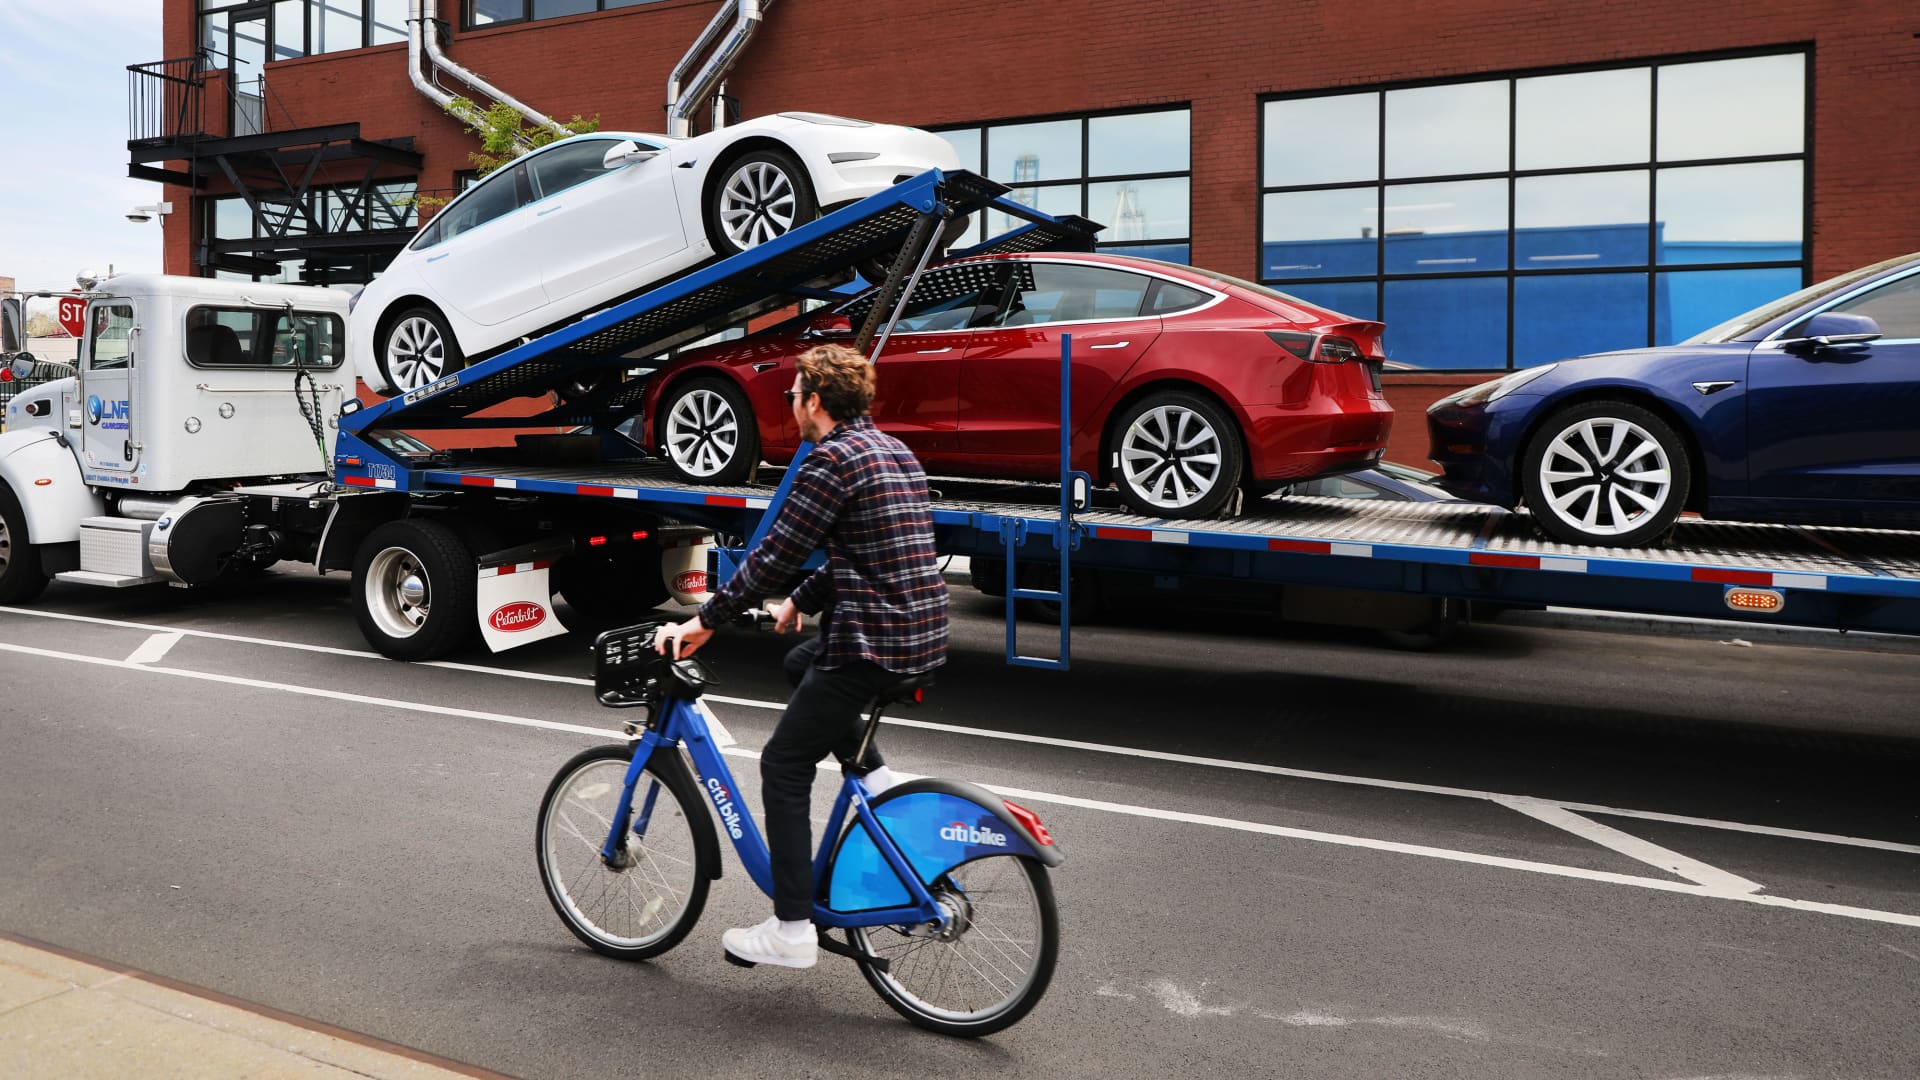 Tesla cars are delivered to a showroom in Brooklyn, New York on April 25, 2019.